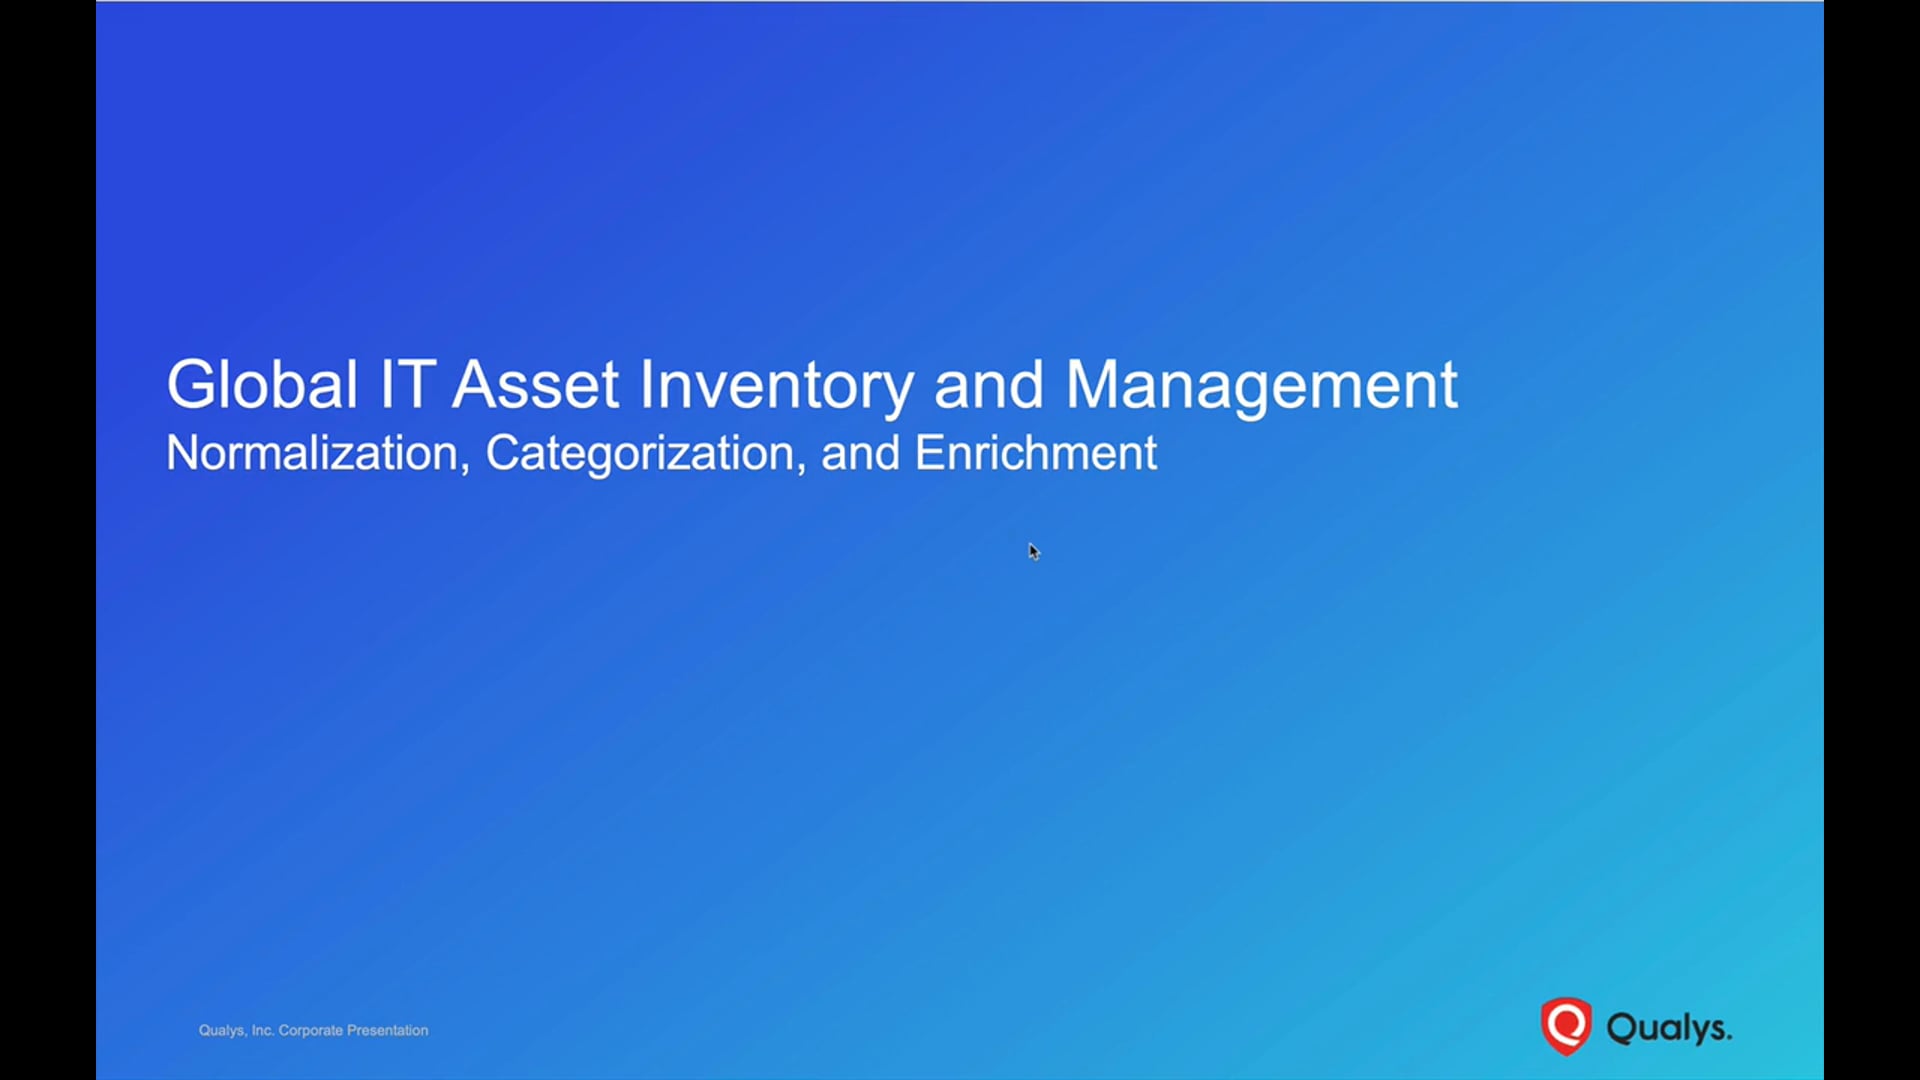 Global IT Asset Inventory - Normalization, Categorization and Enrichment